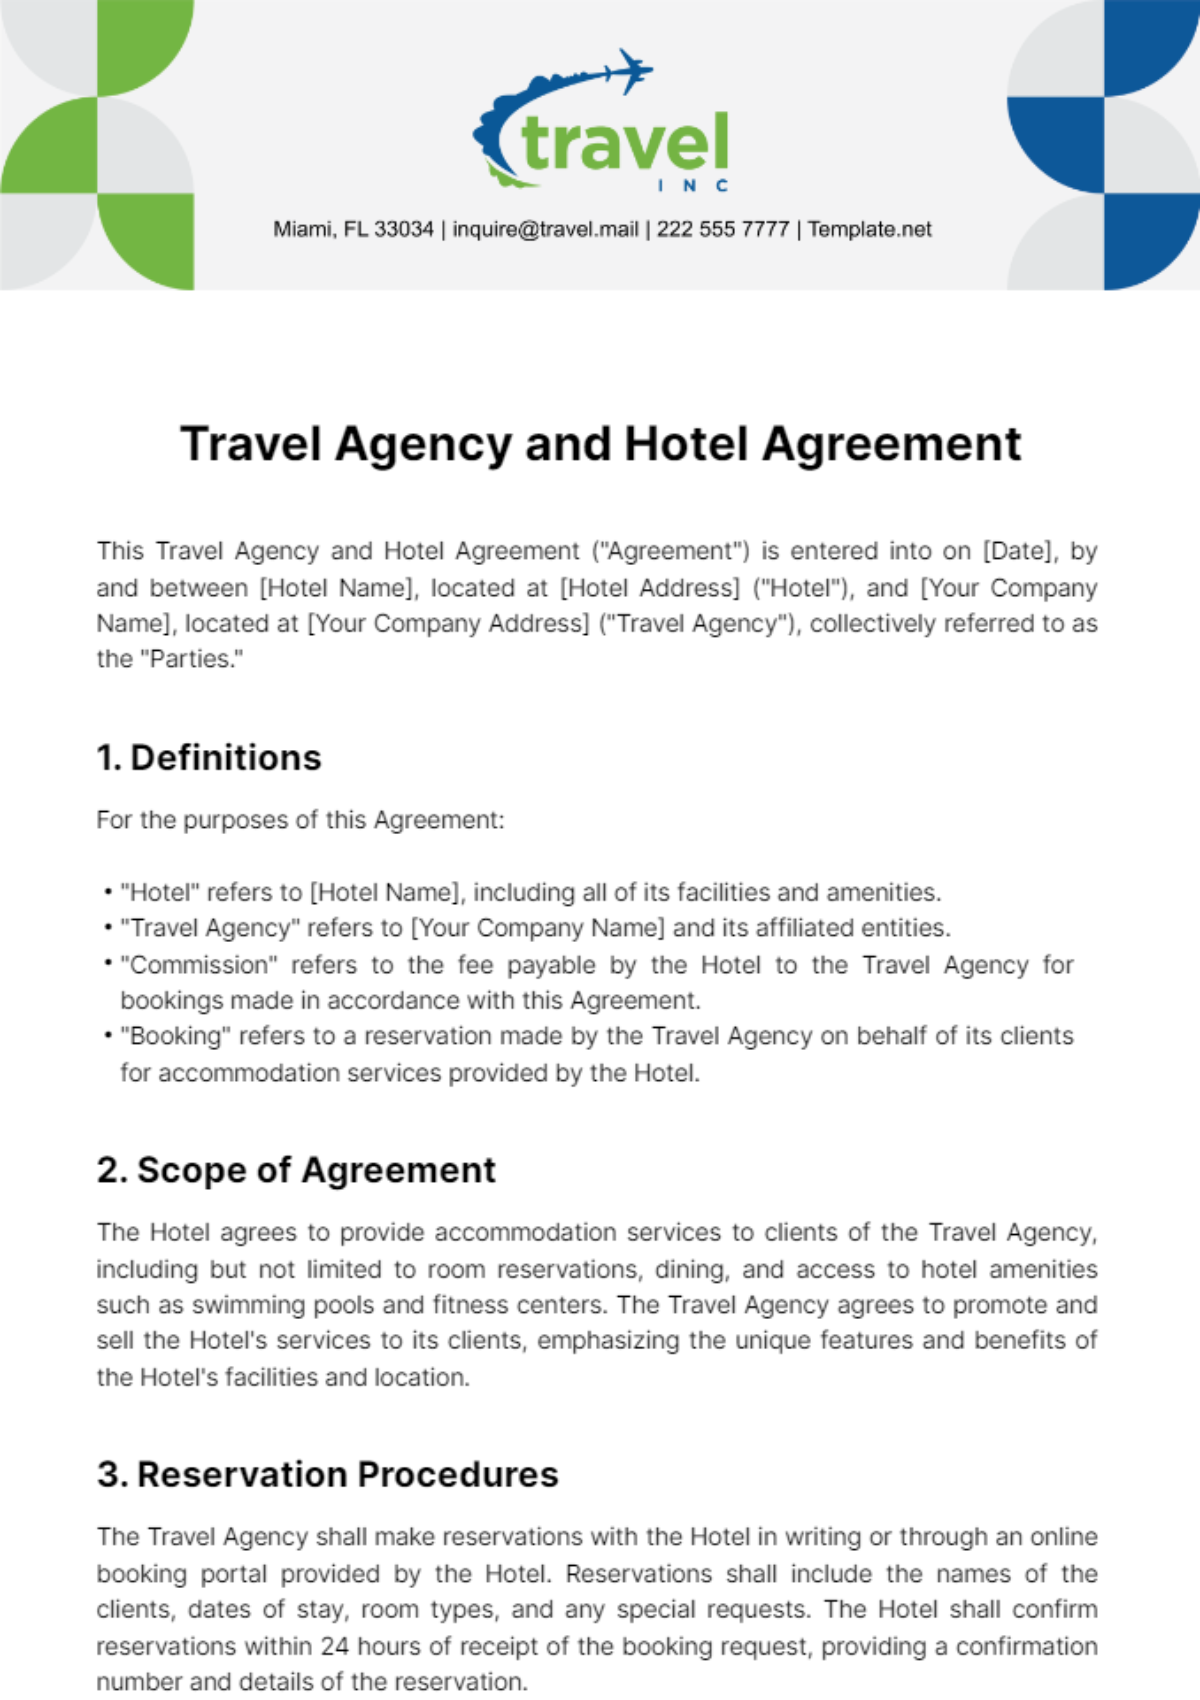 Travel Agency and Hotel Agreement Template